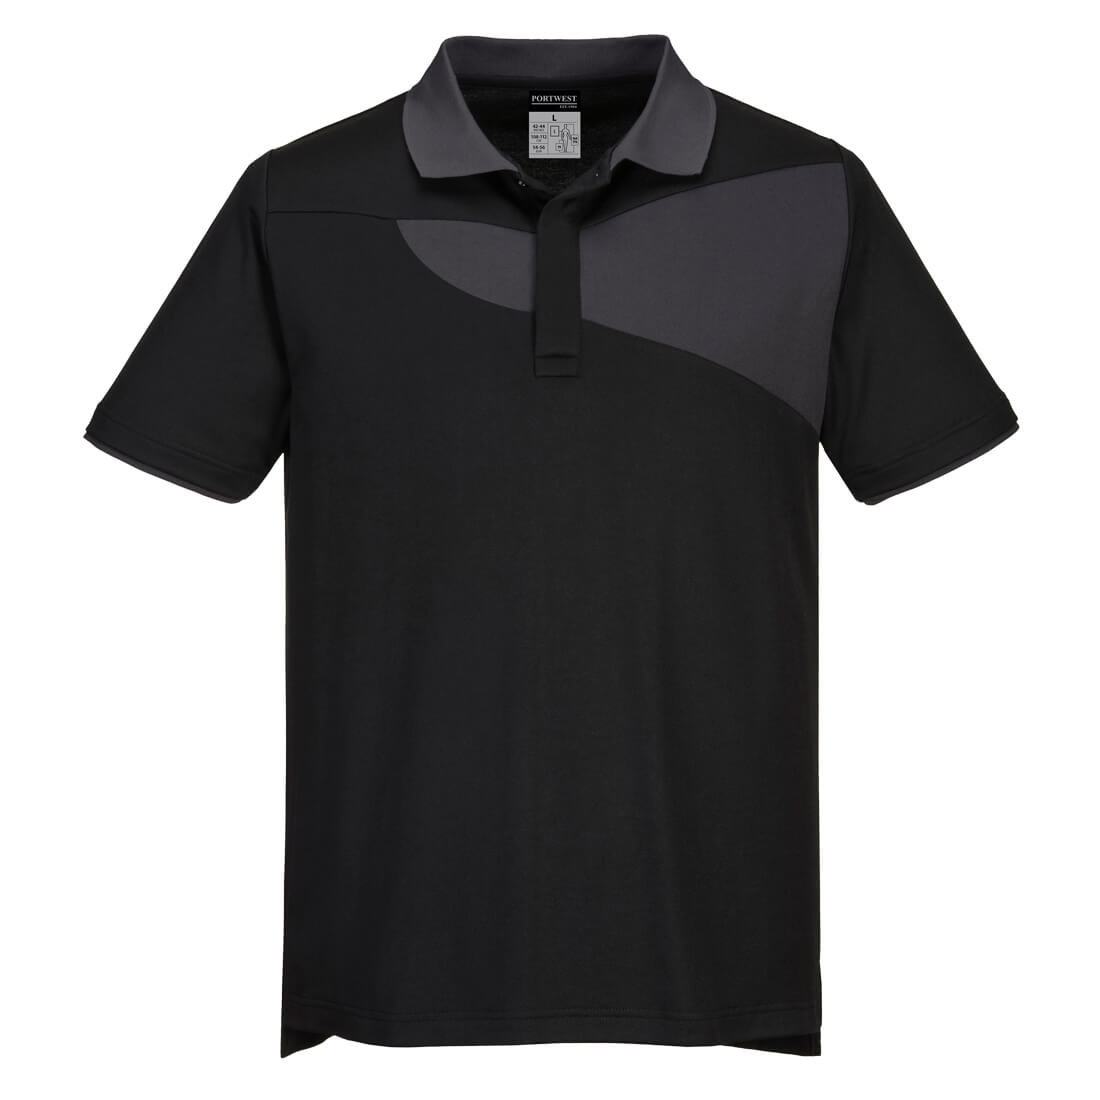 Portwest PW2 Cotton Comfort Polo Shirt Short Sleeved